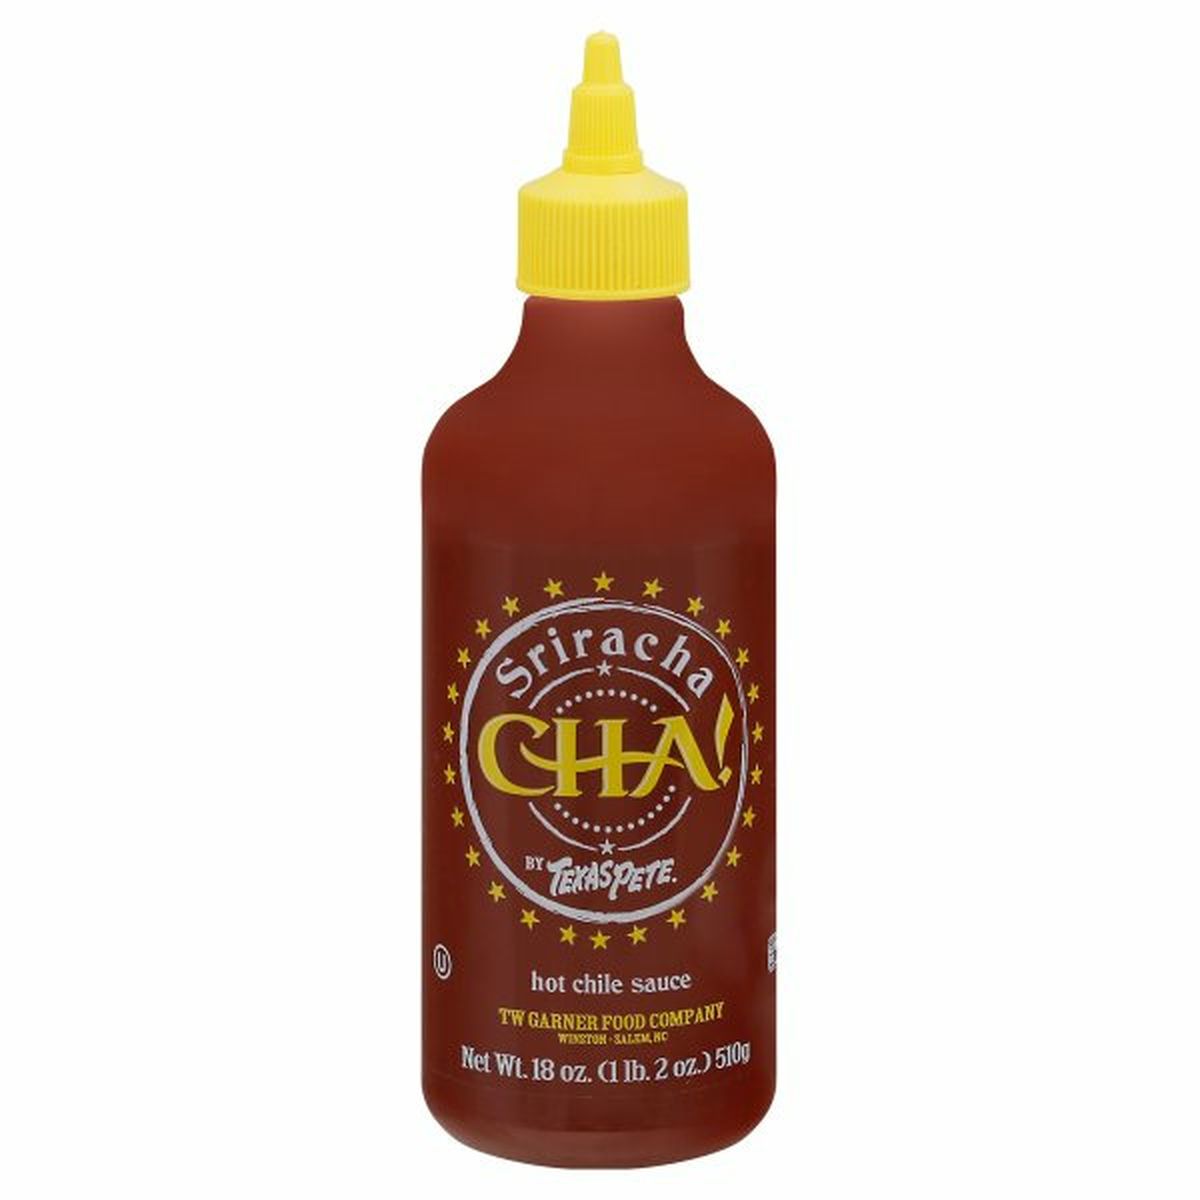 Calories in CHA! by Texas Pete Hot Chile Sauce, Sriracha